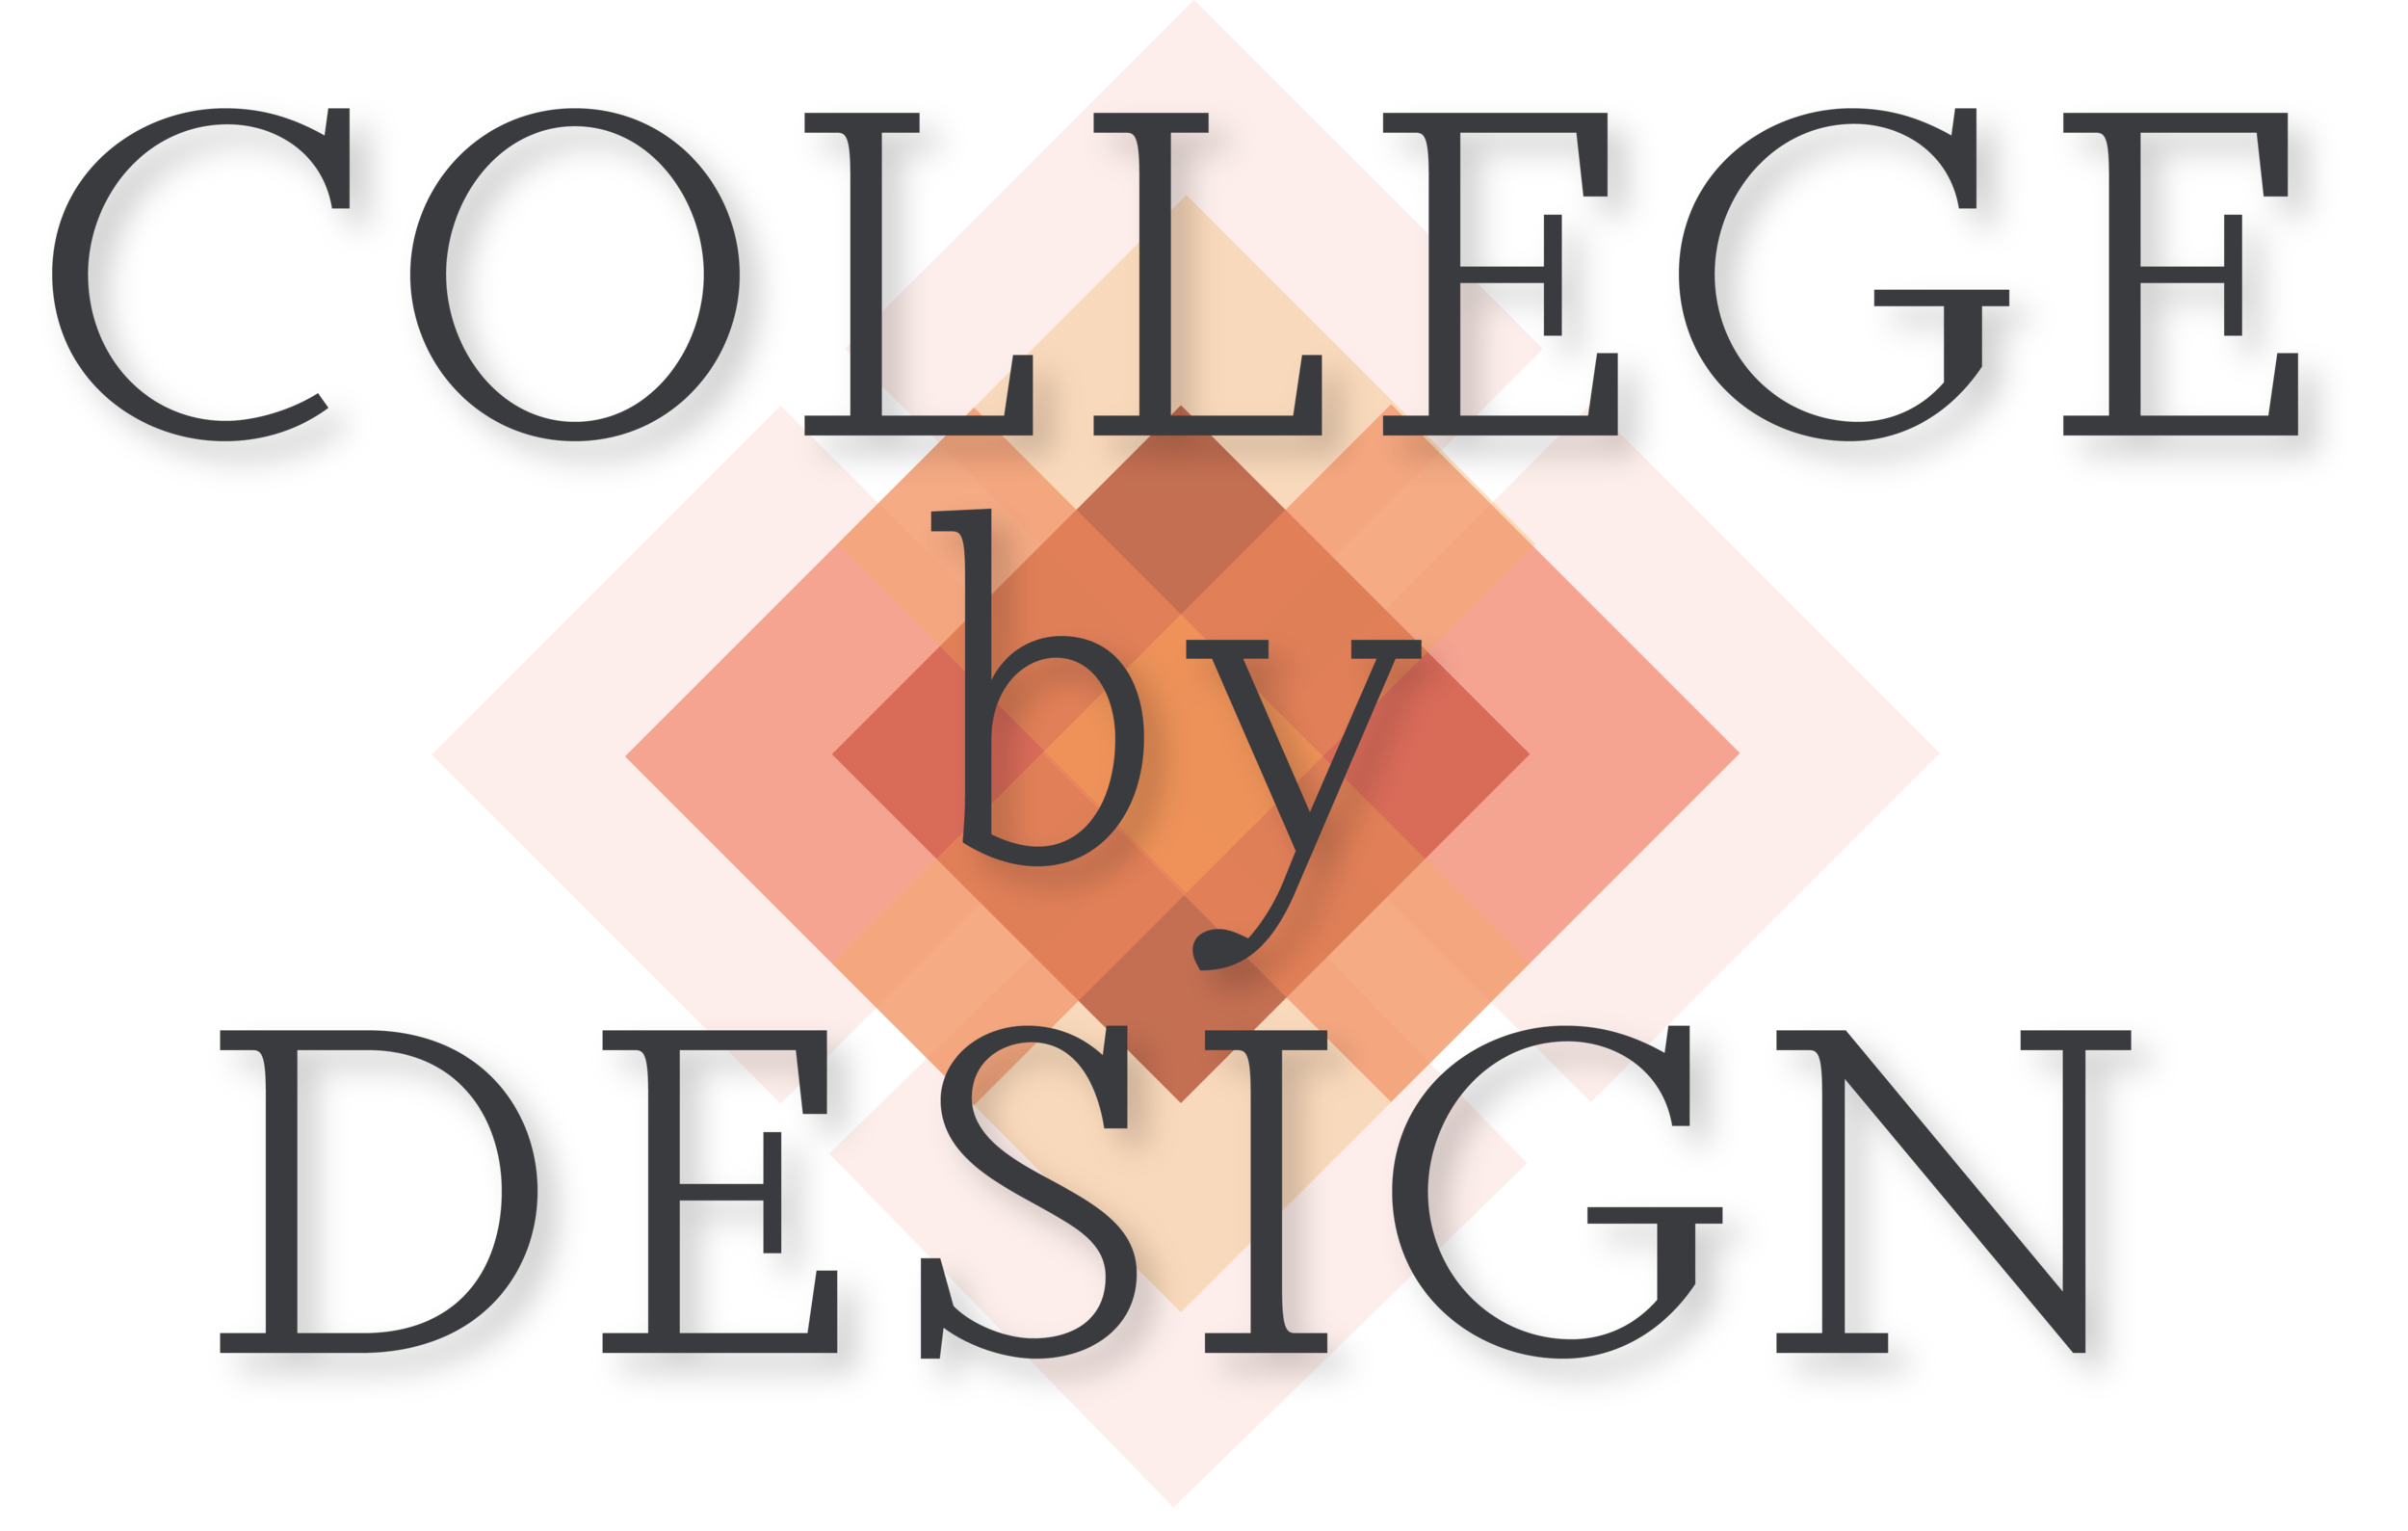 College by Design: customized guidance for your application, essay, and college selection